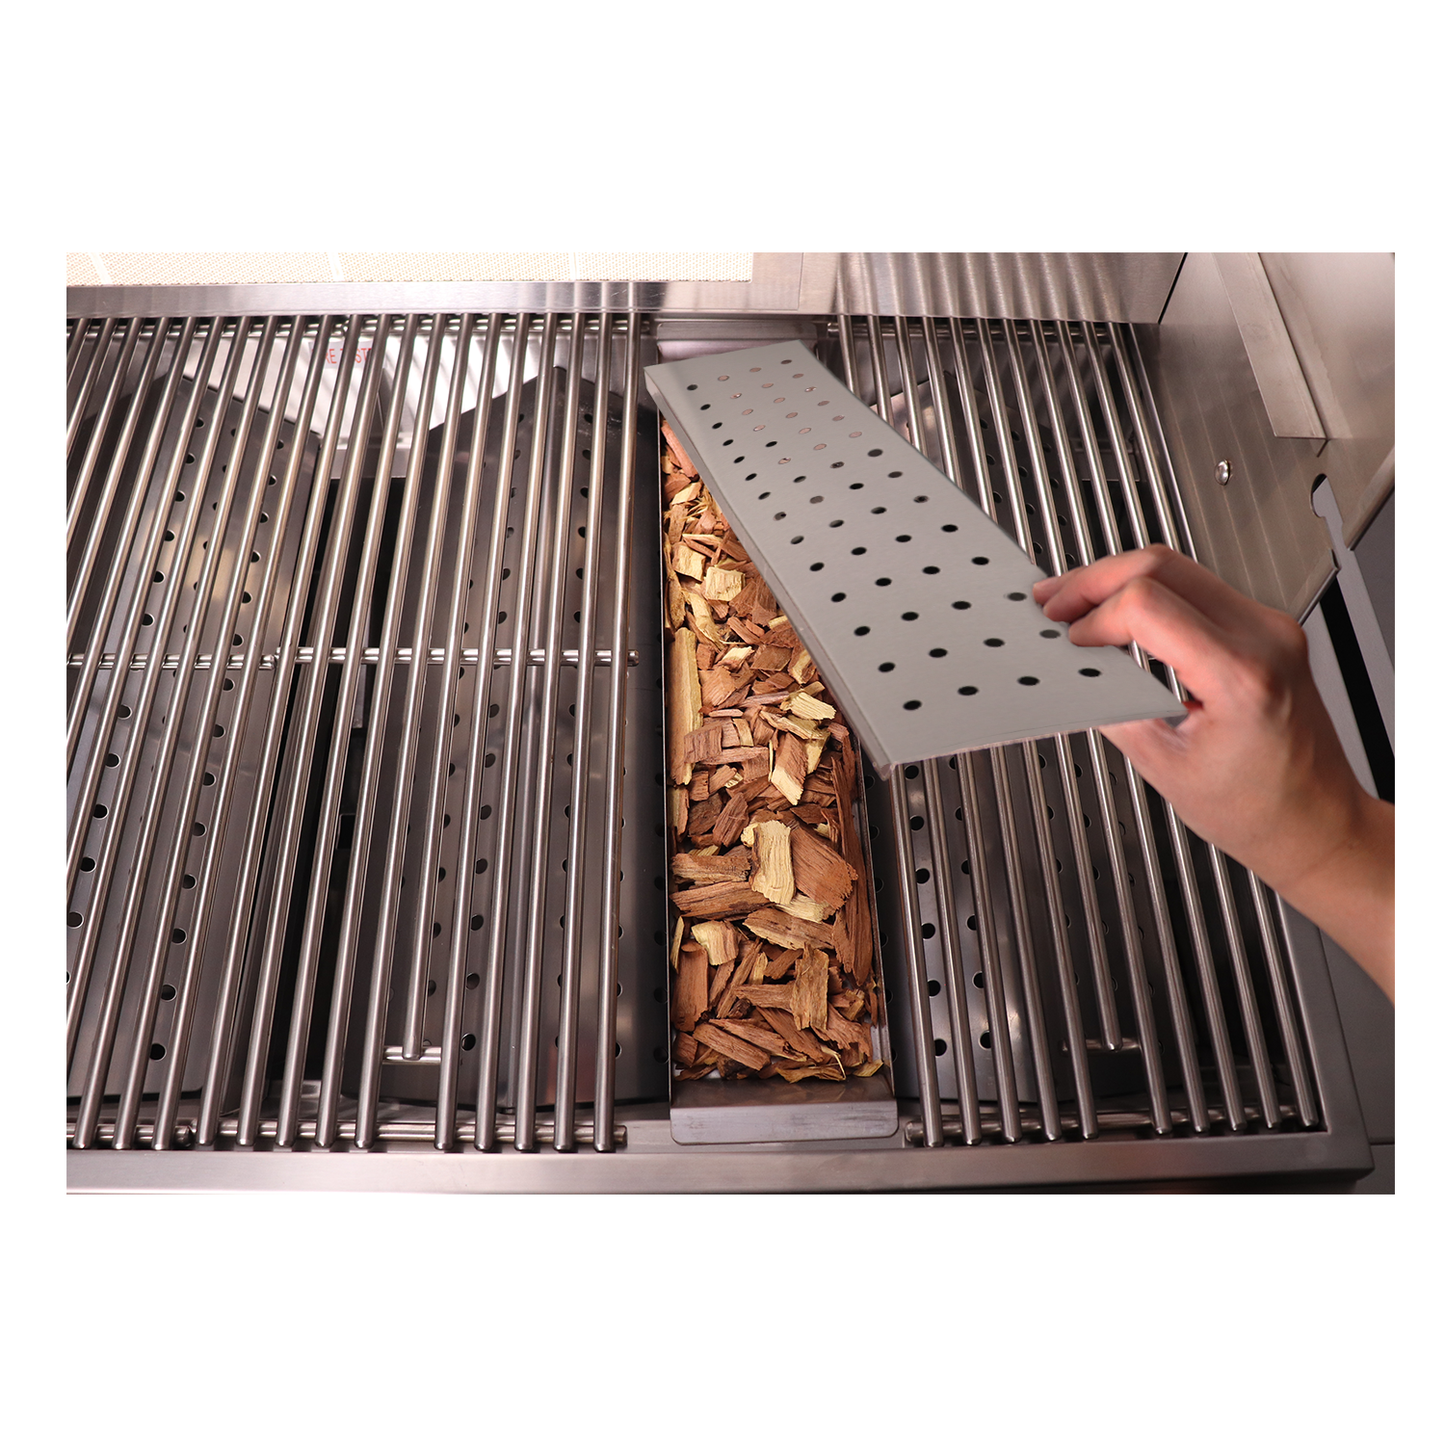 Smoker Tray for Premier Series Grills